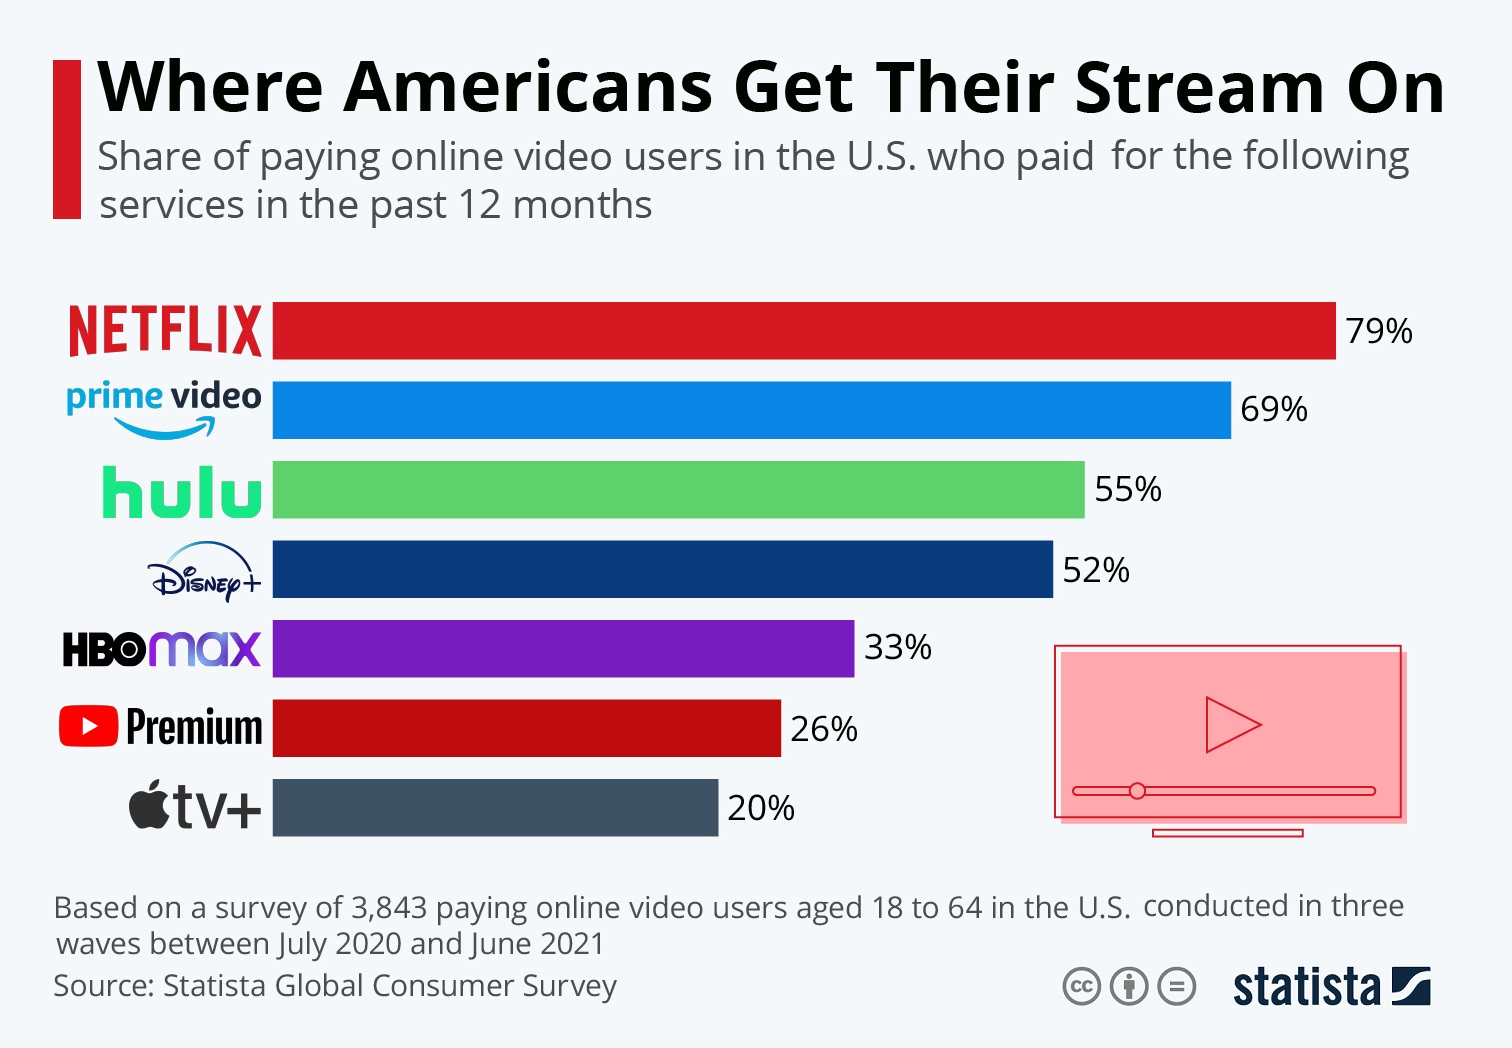 Data charts reveal interesting insights about American content consumption